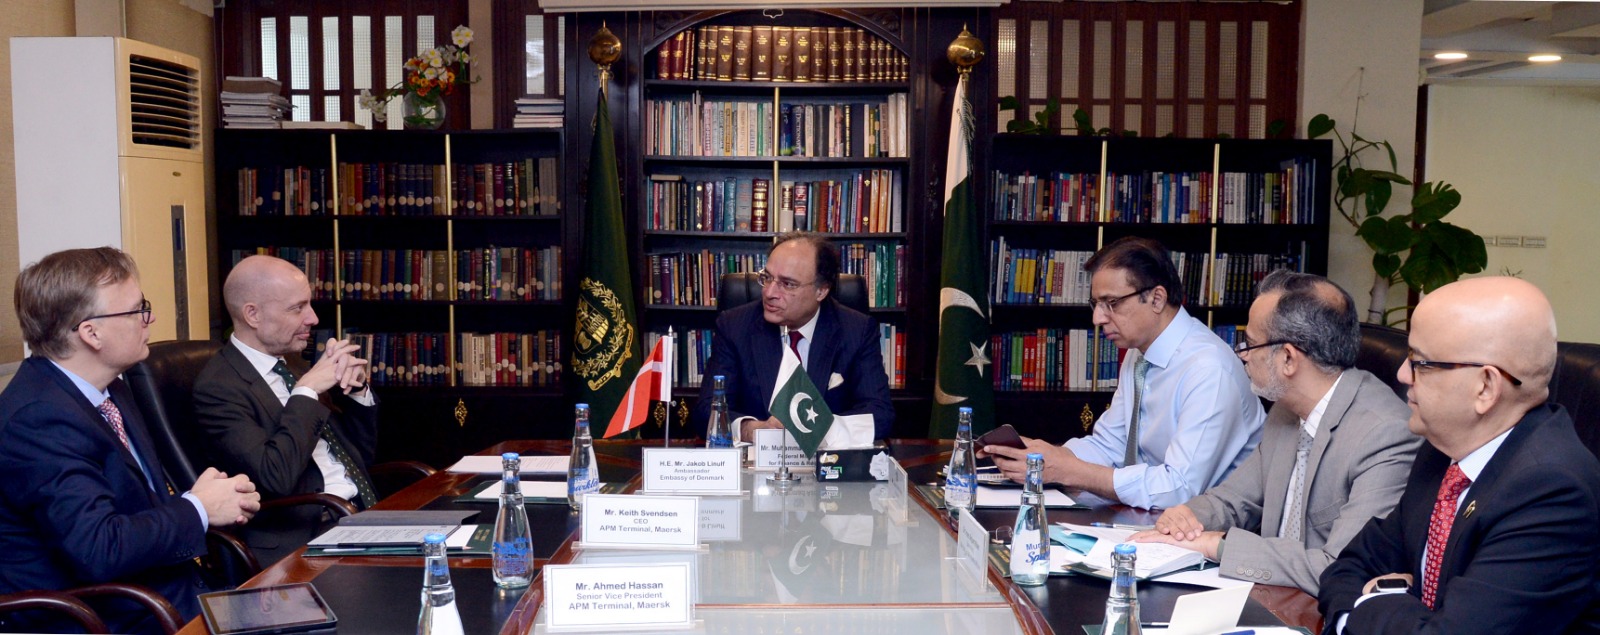 Finance Minister Meets with APM Terminals Team to Discuss Operations in Pakistan 2